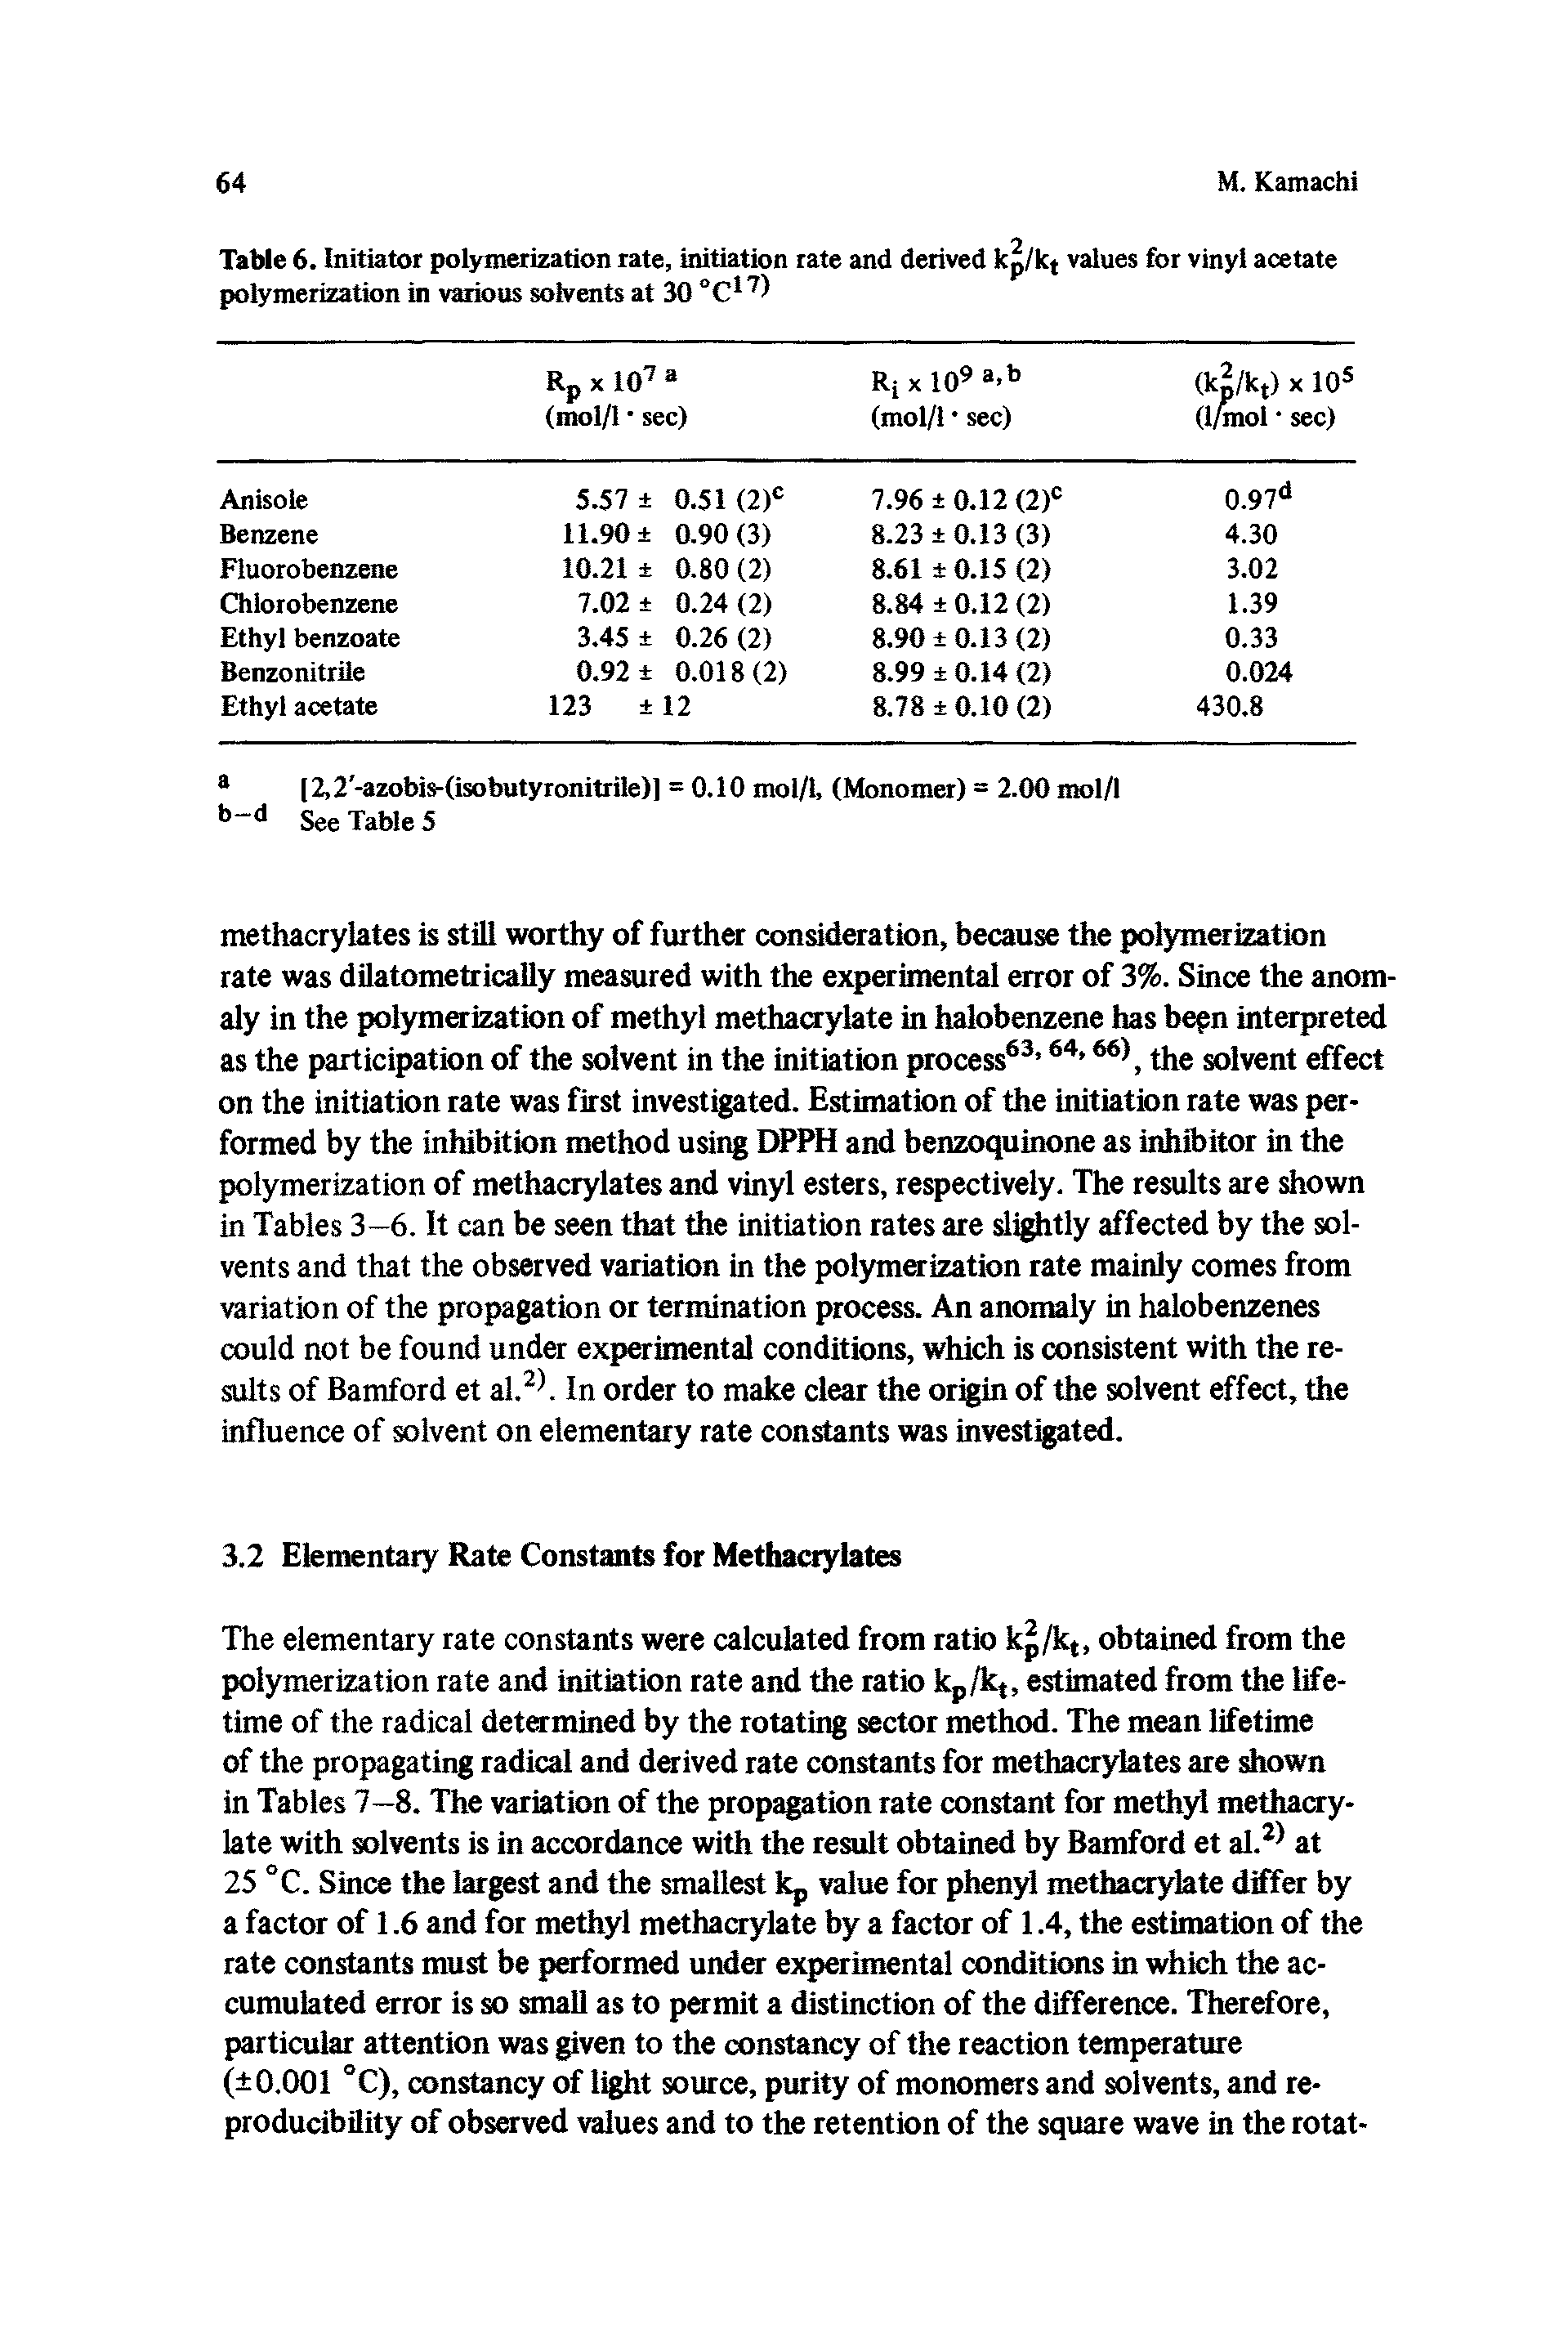 Table 6. Initiator polymerization rate, initiation rate and derived kp/kt values for vinyl acetate polymerization in various solvents at 30 °C17)...